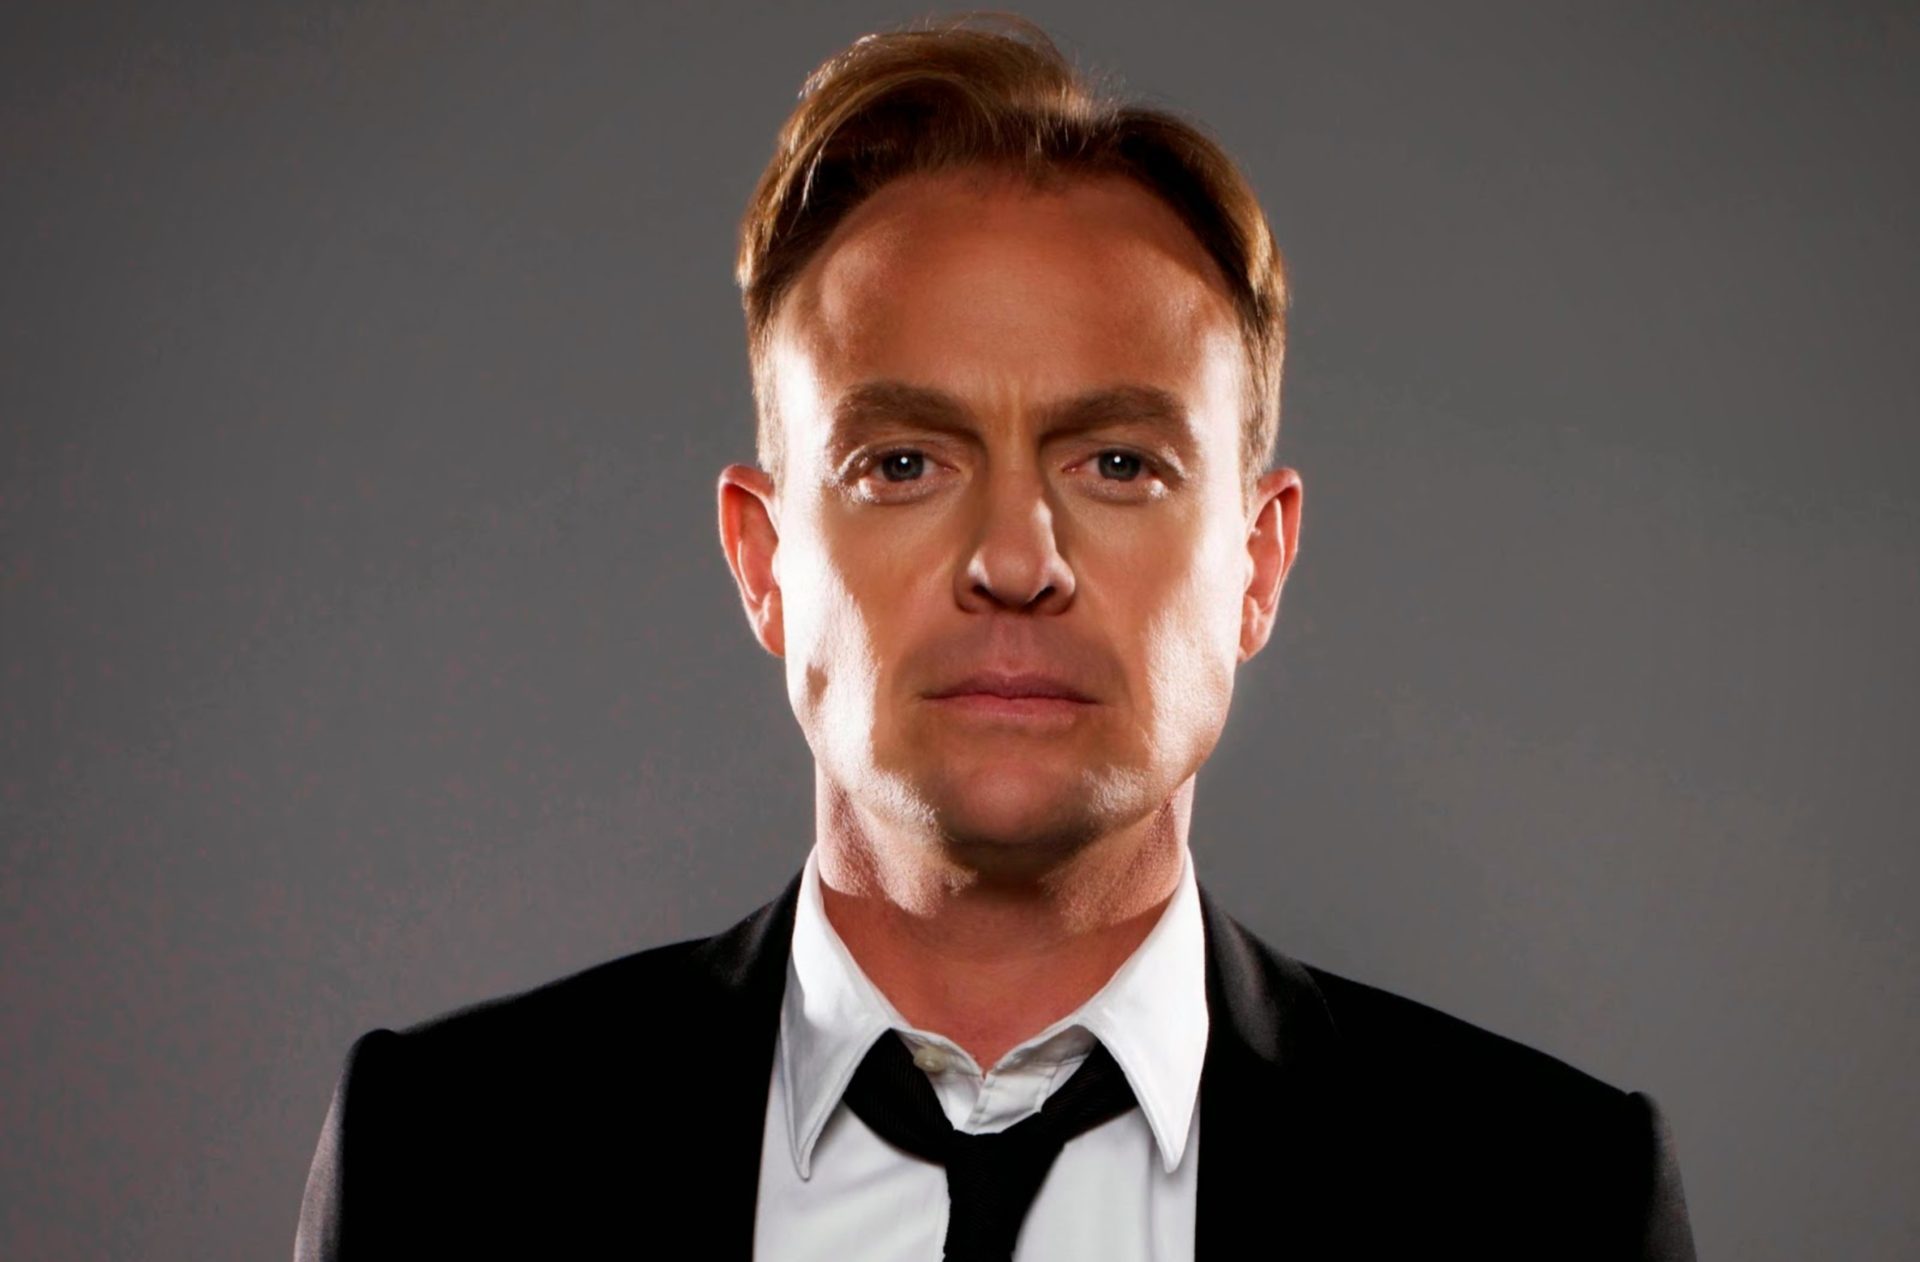 Jason Donovan is performing at Rewind Festival on July 23.